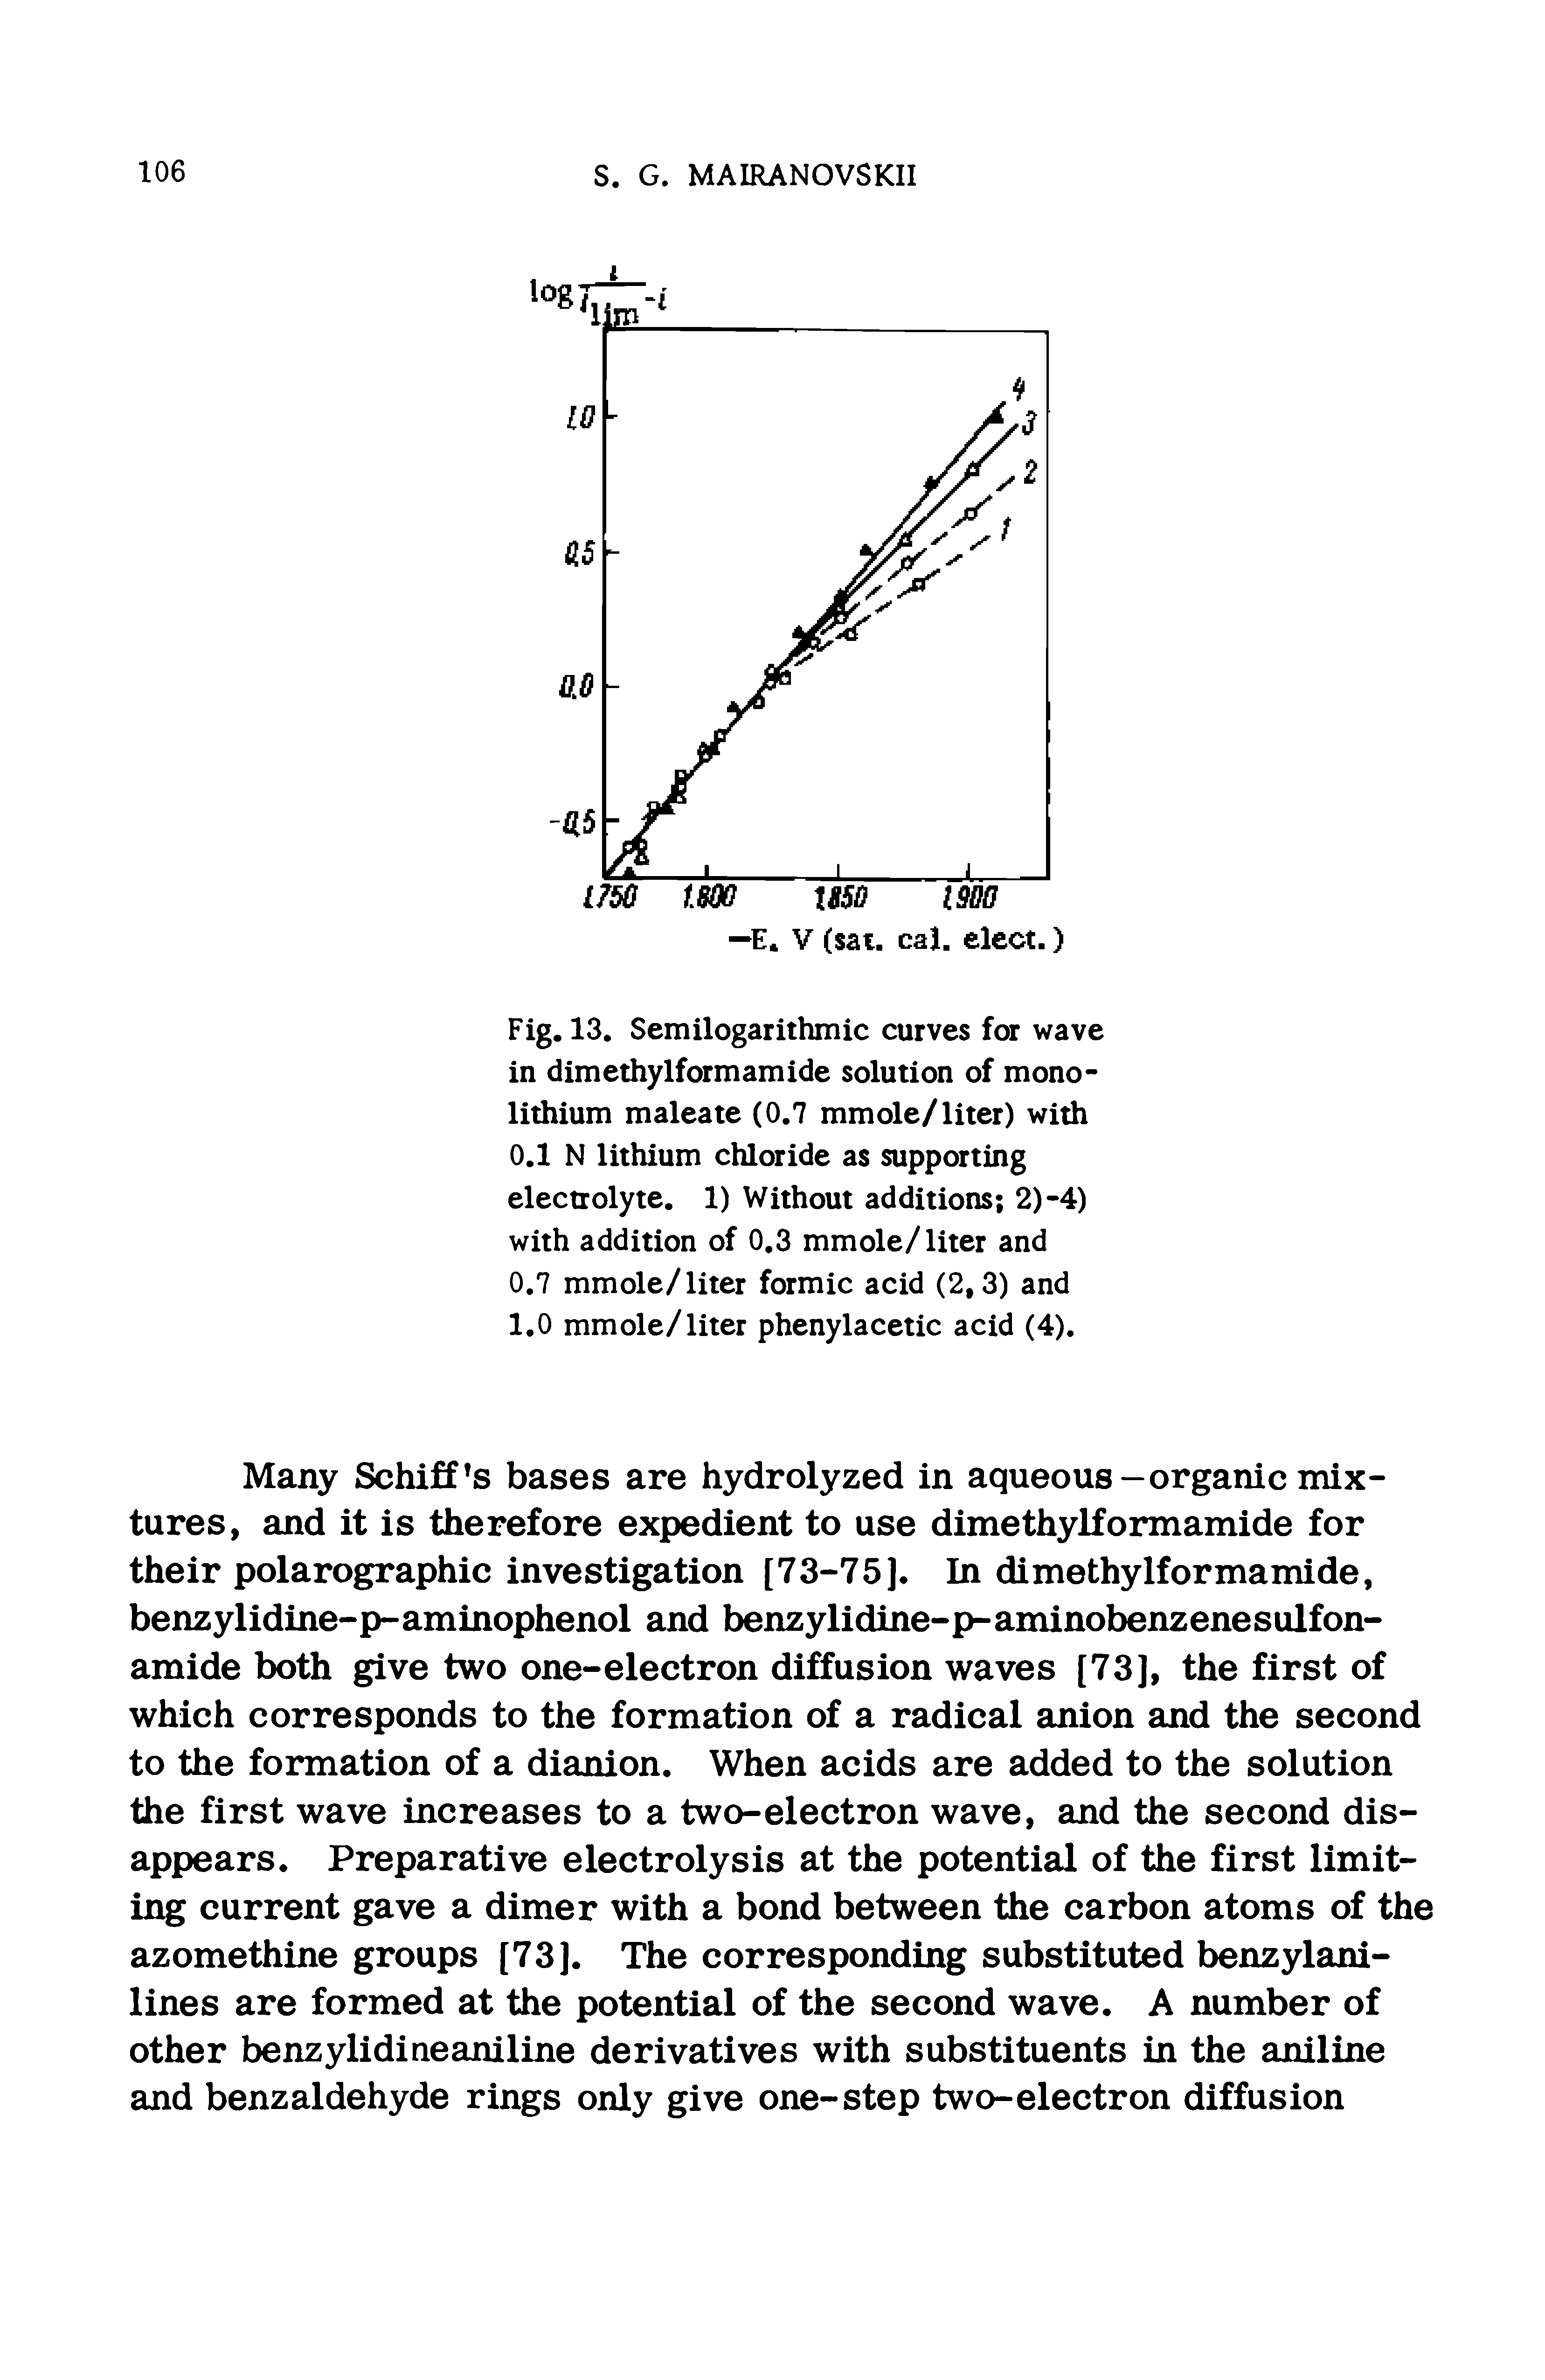 Fig. 13. Semilogarithmic curves for wave in dimethylformamide solution of mono-lithium maleate (0.7 mmole/liter) with 0.1 N lithium chloride as supporting electrolyte. 1) Without additions 2)-4) with addition of 0.3 mmole/liter and 0.7 mmole/liter formic acid (2,3) and 1,0 mmole/liter phenylacetic acid (4).